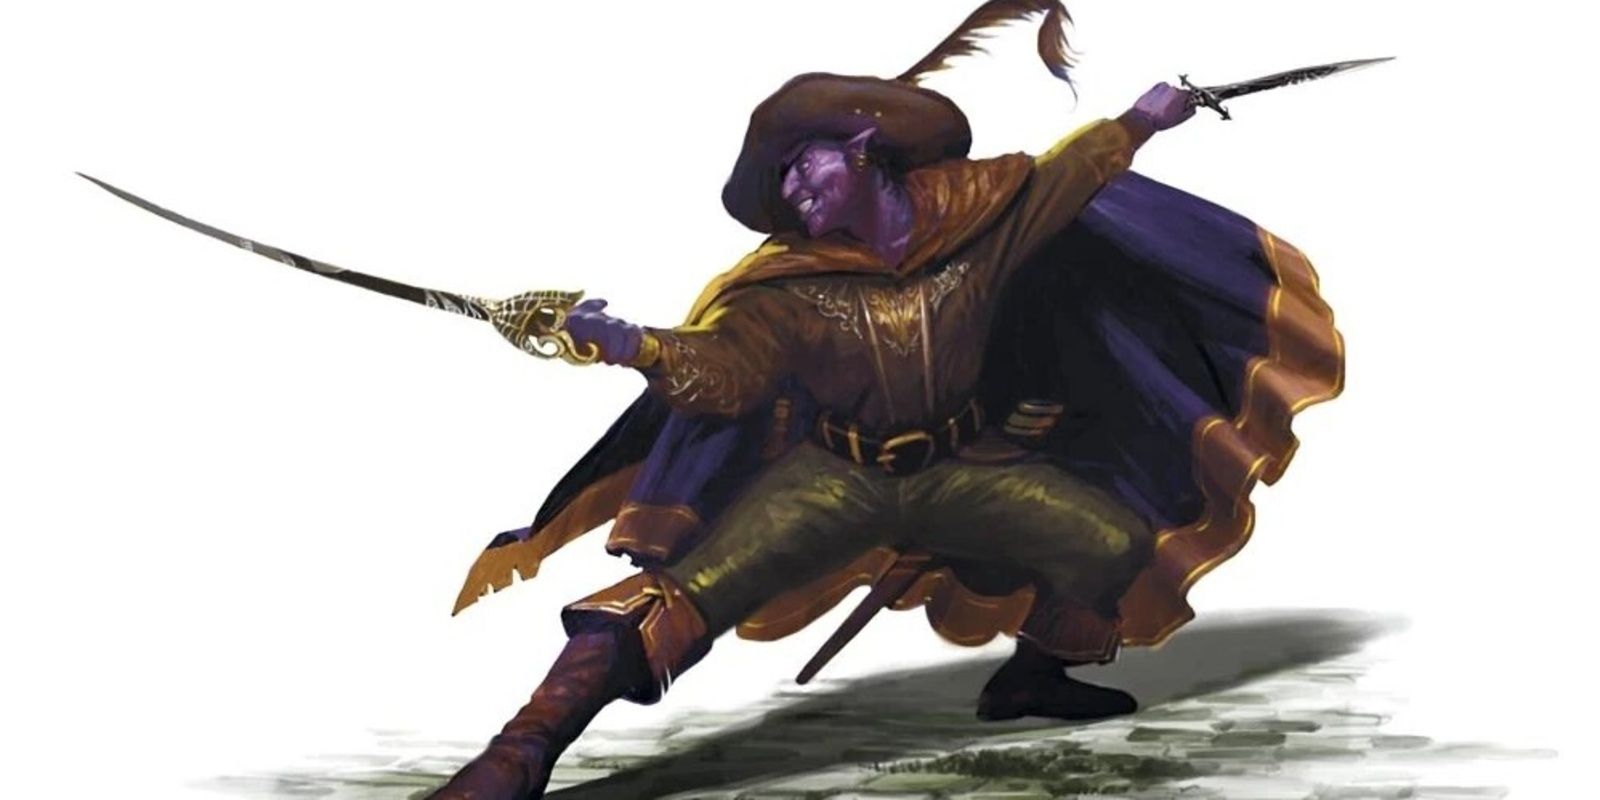 Jarlaxle Baenre poised to attack the side of the image, Dungeons & Dragons